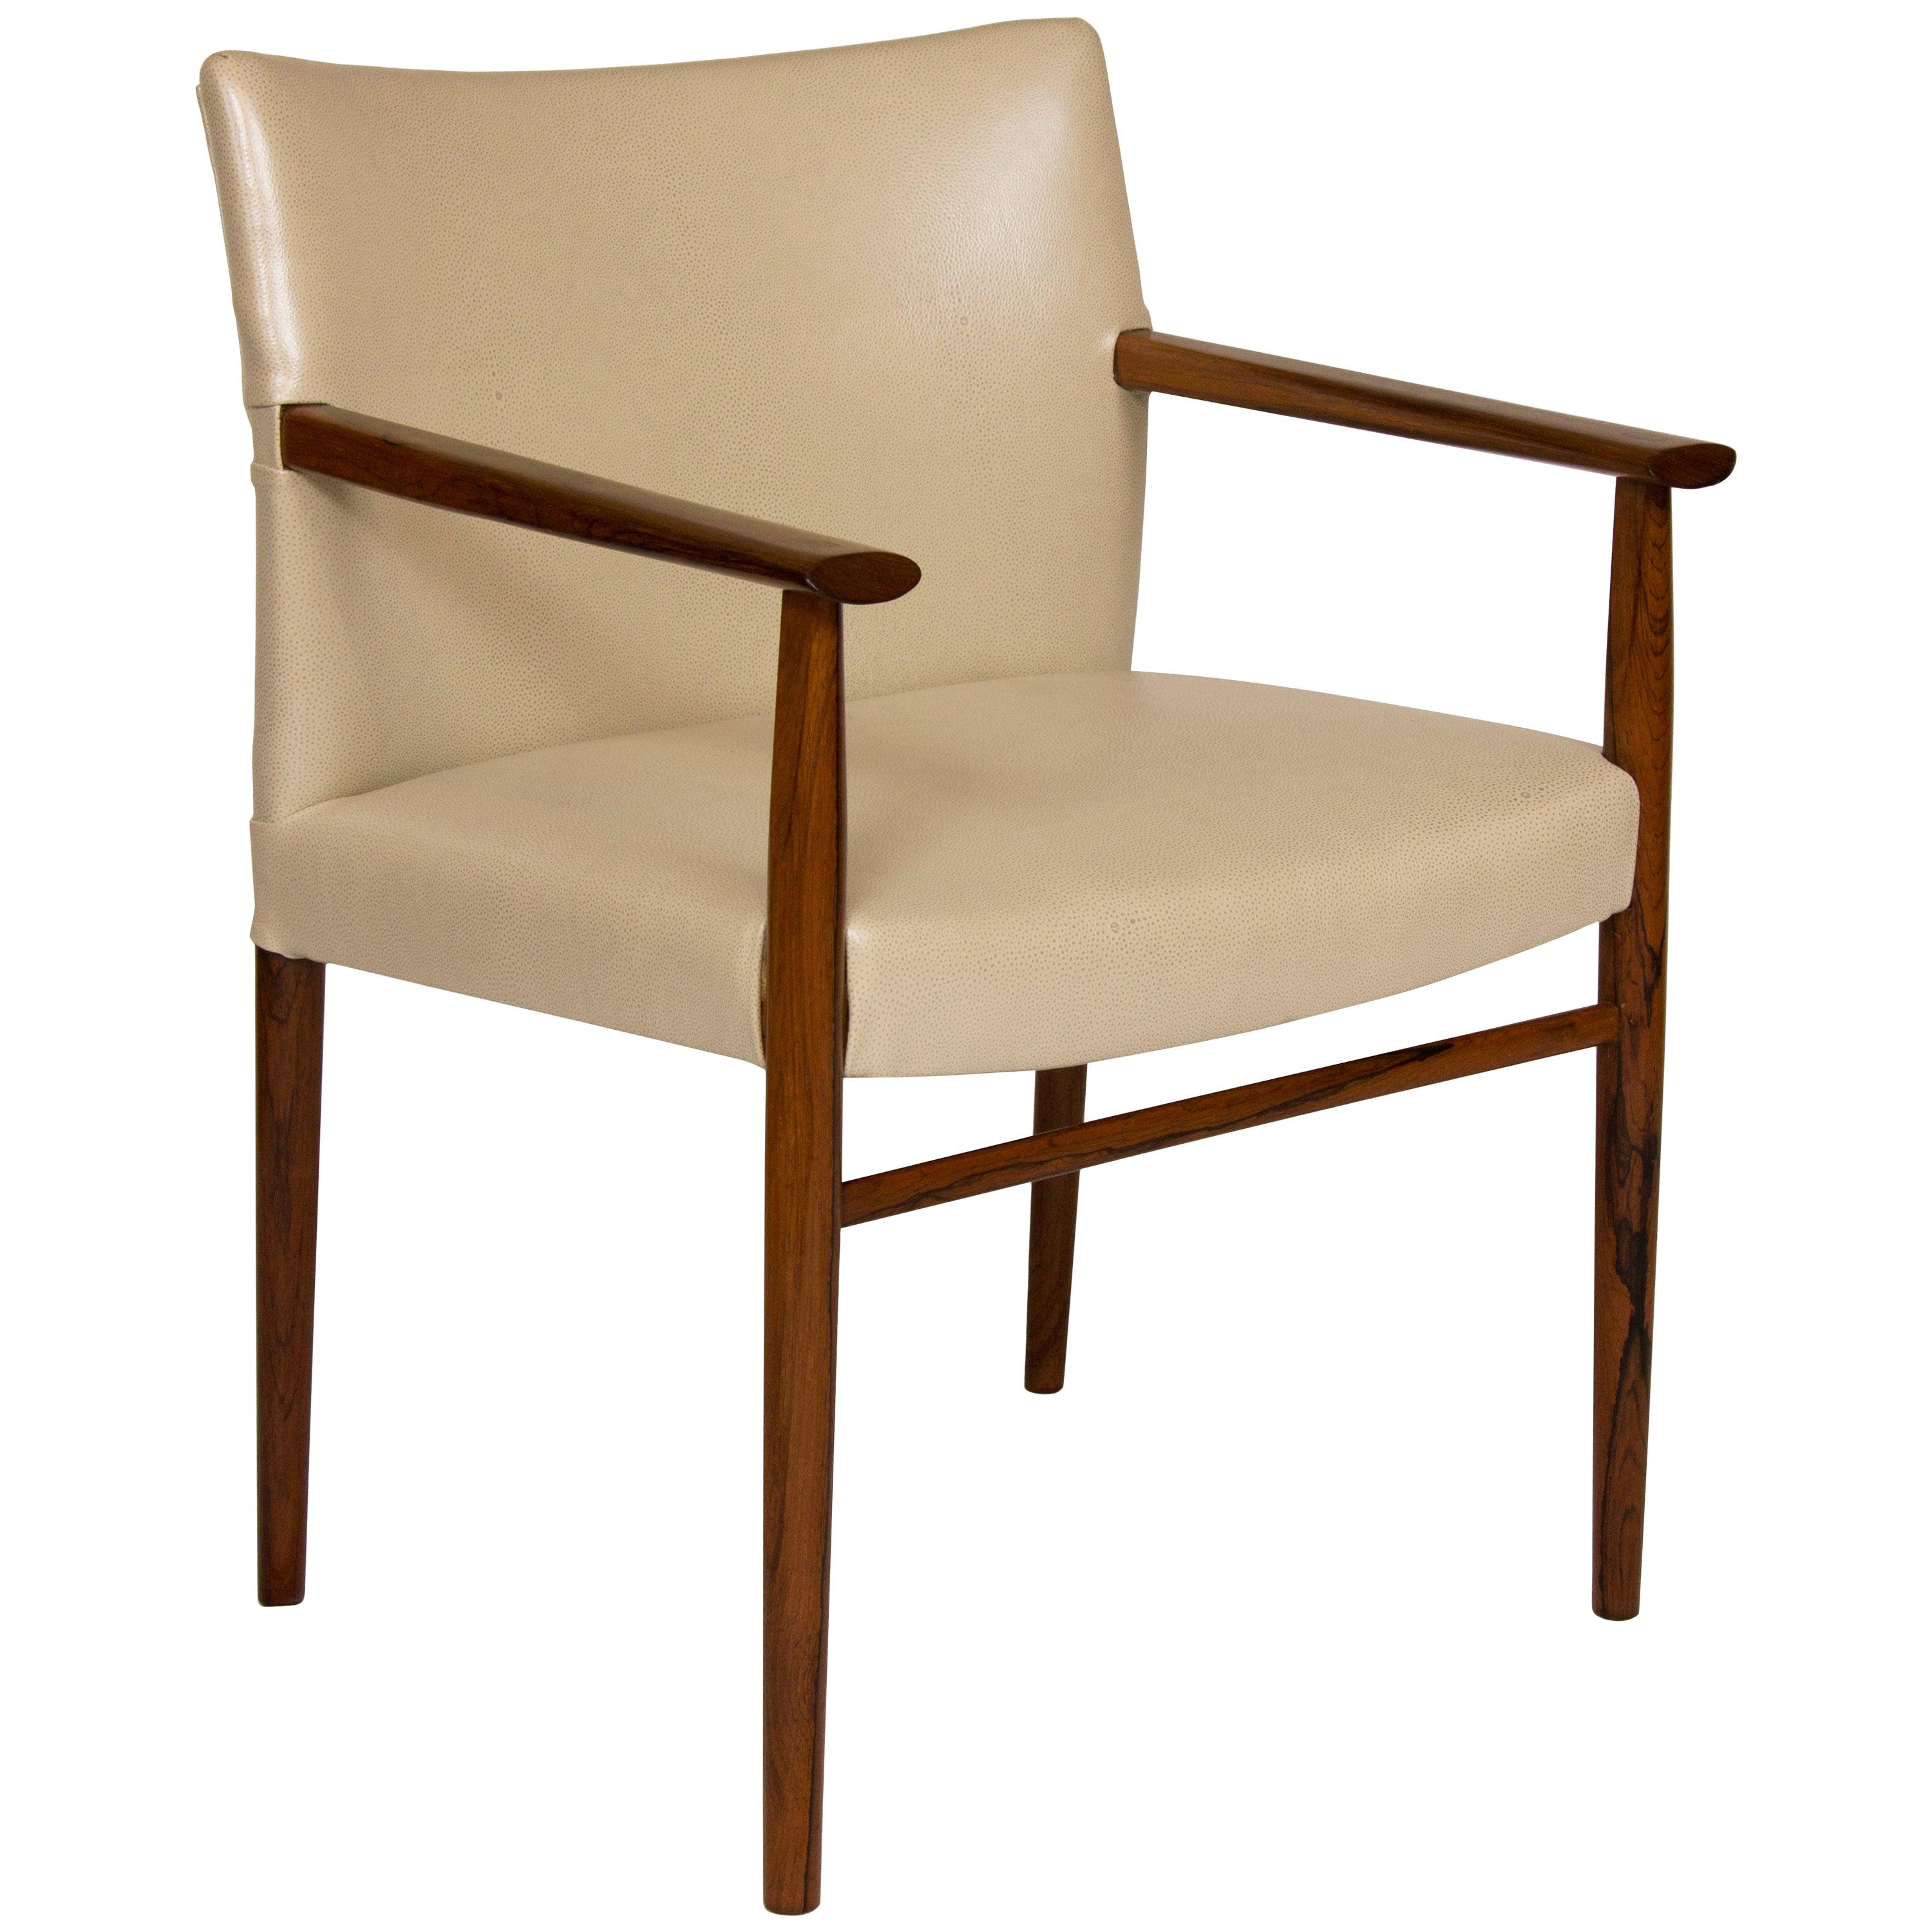 Mid-Century Modern Scandinavian Rosewood and Cream Leather Desk/Armchair, 1960's For Sale